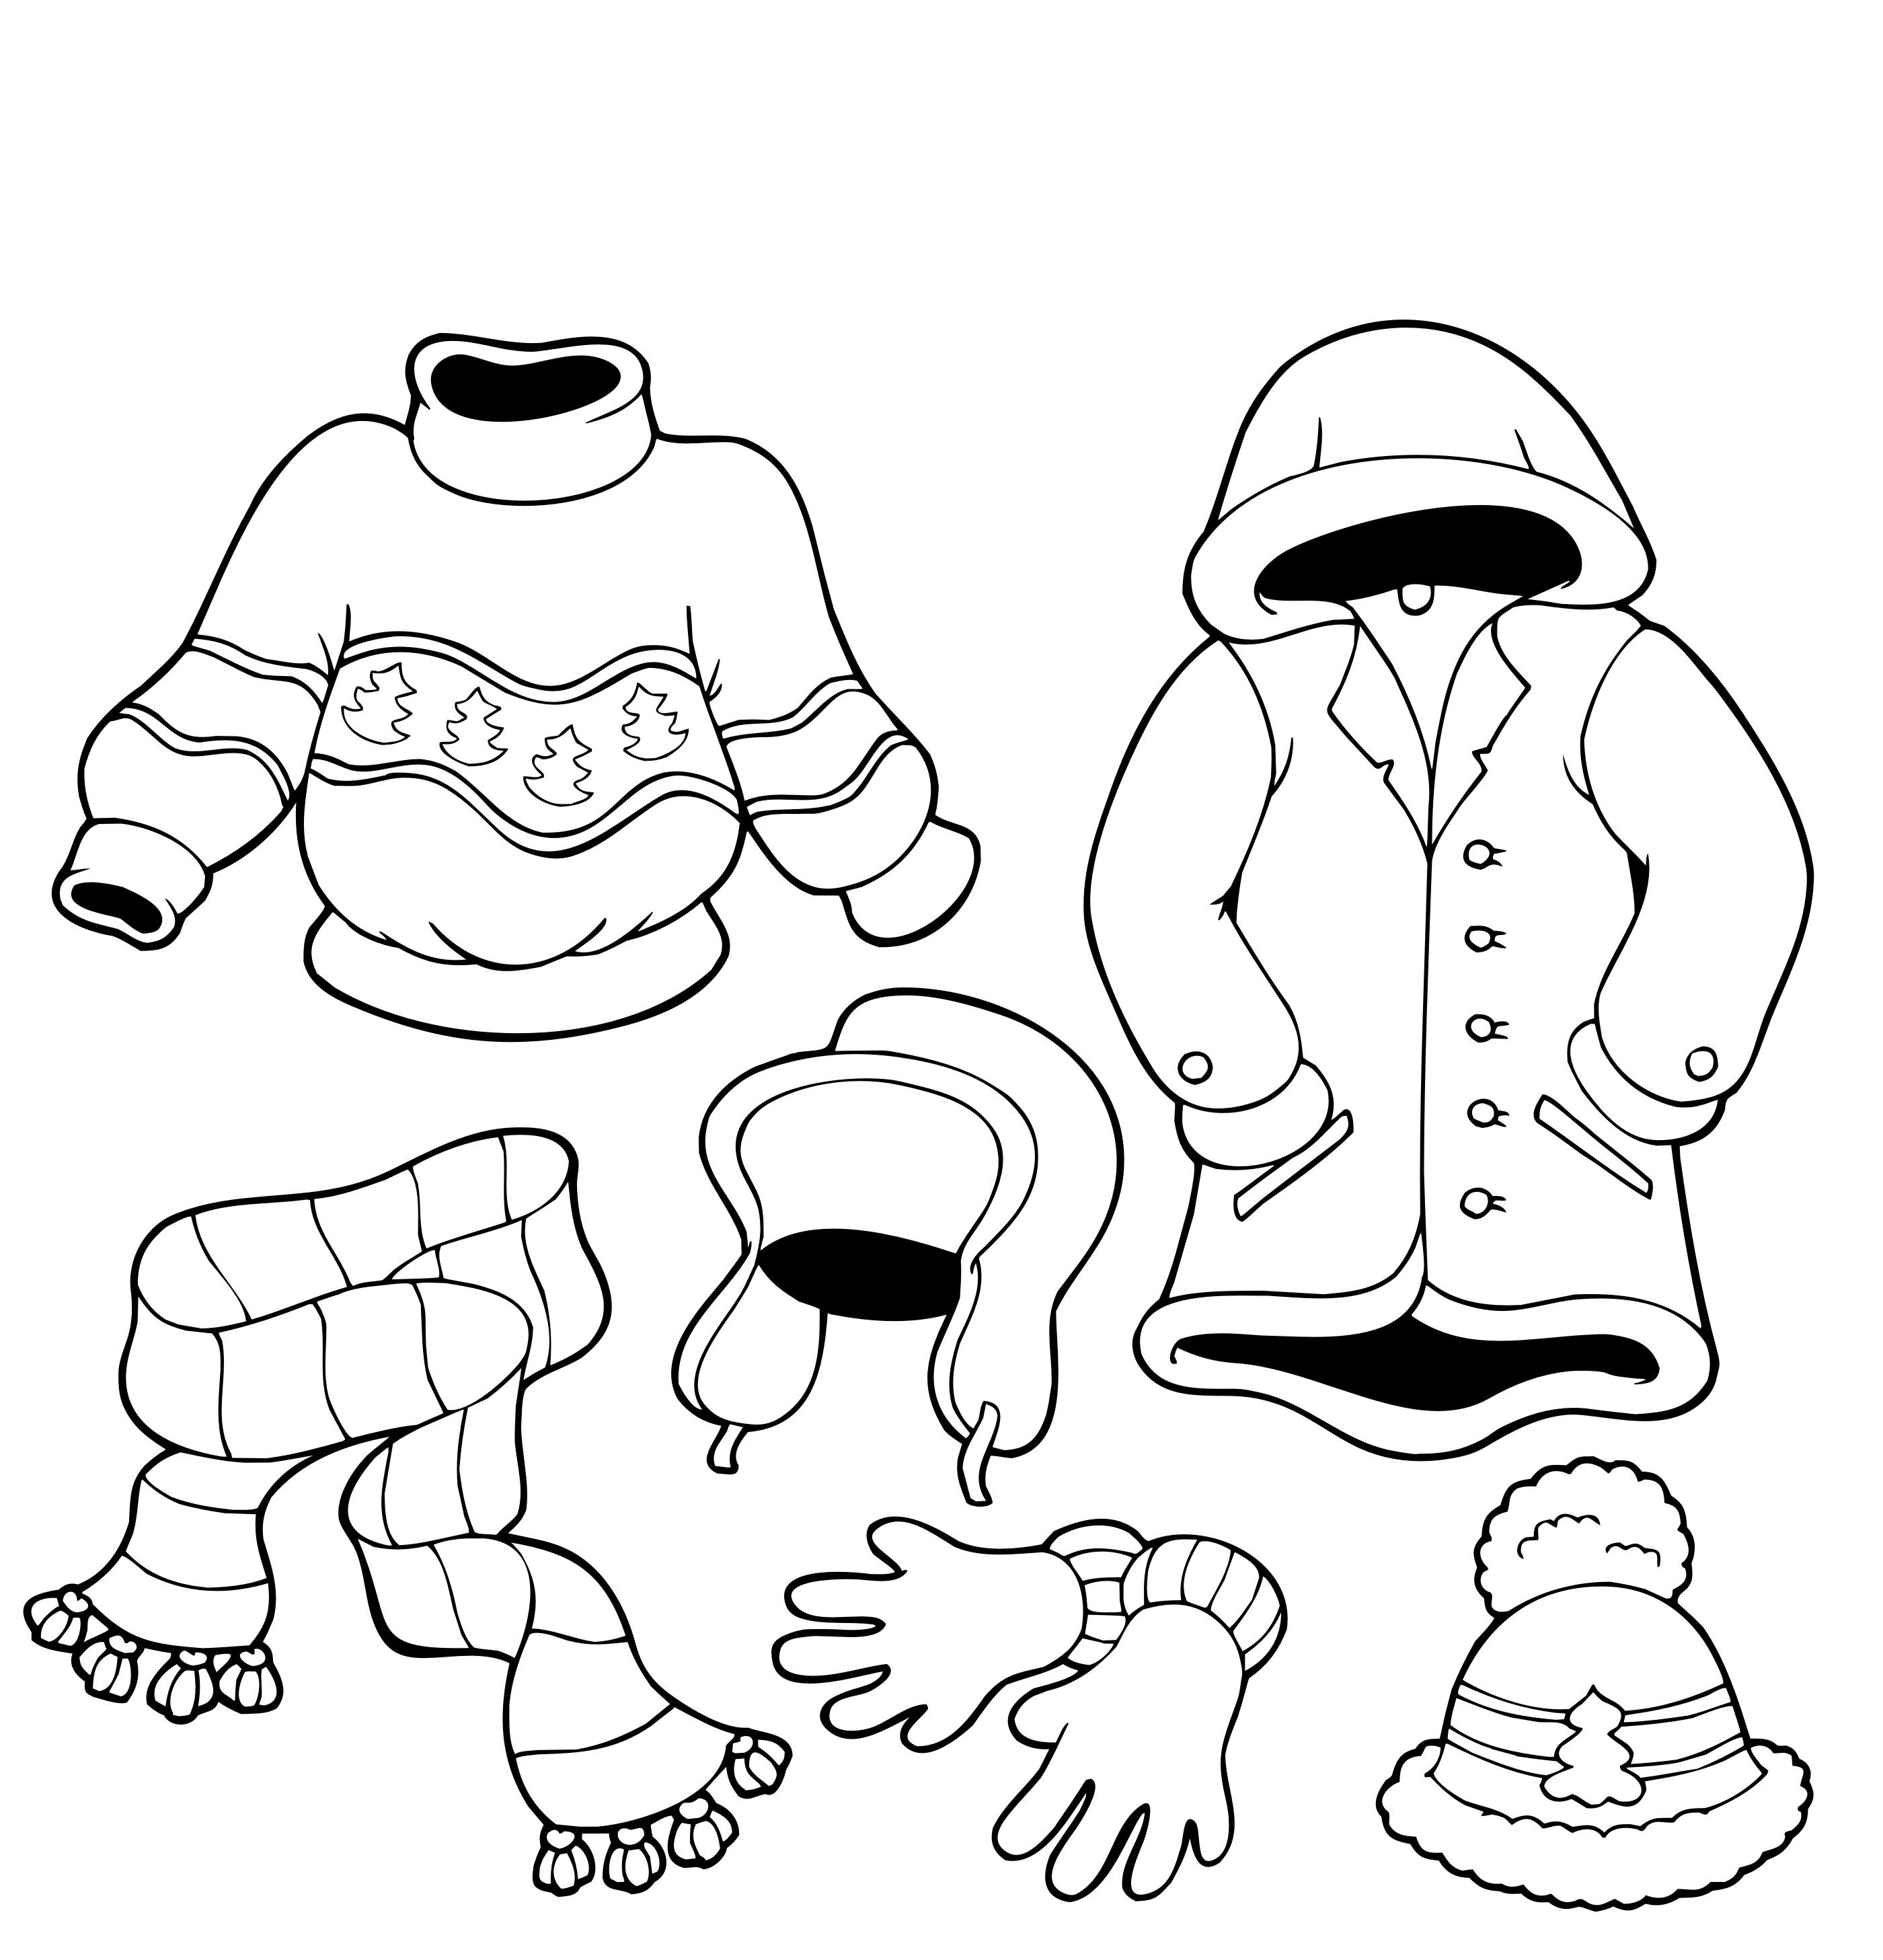 Winter Clothes Coloring Pages Printable Image